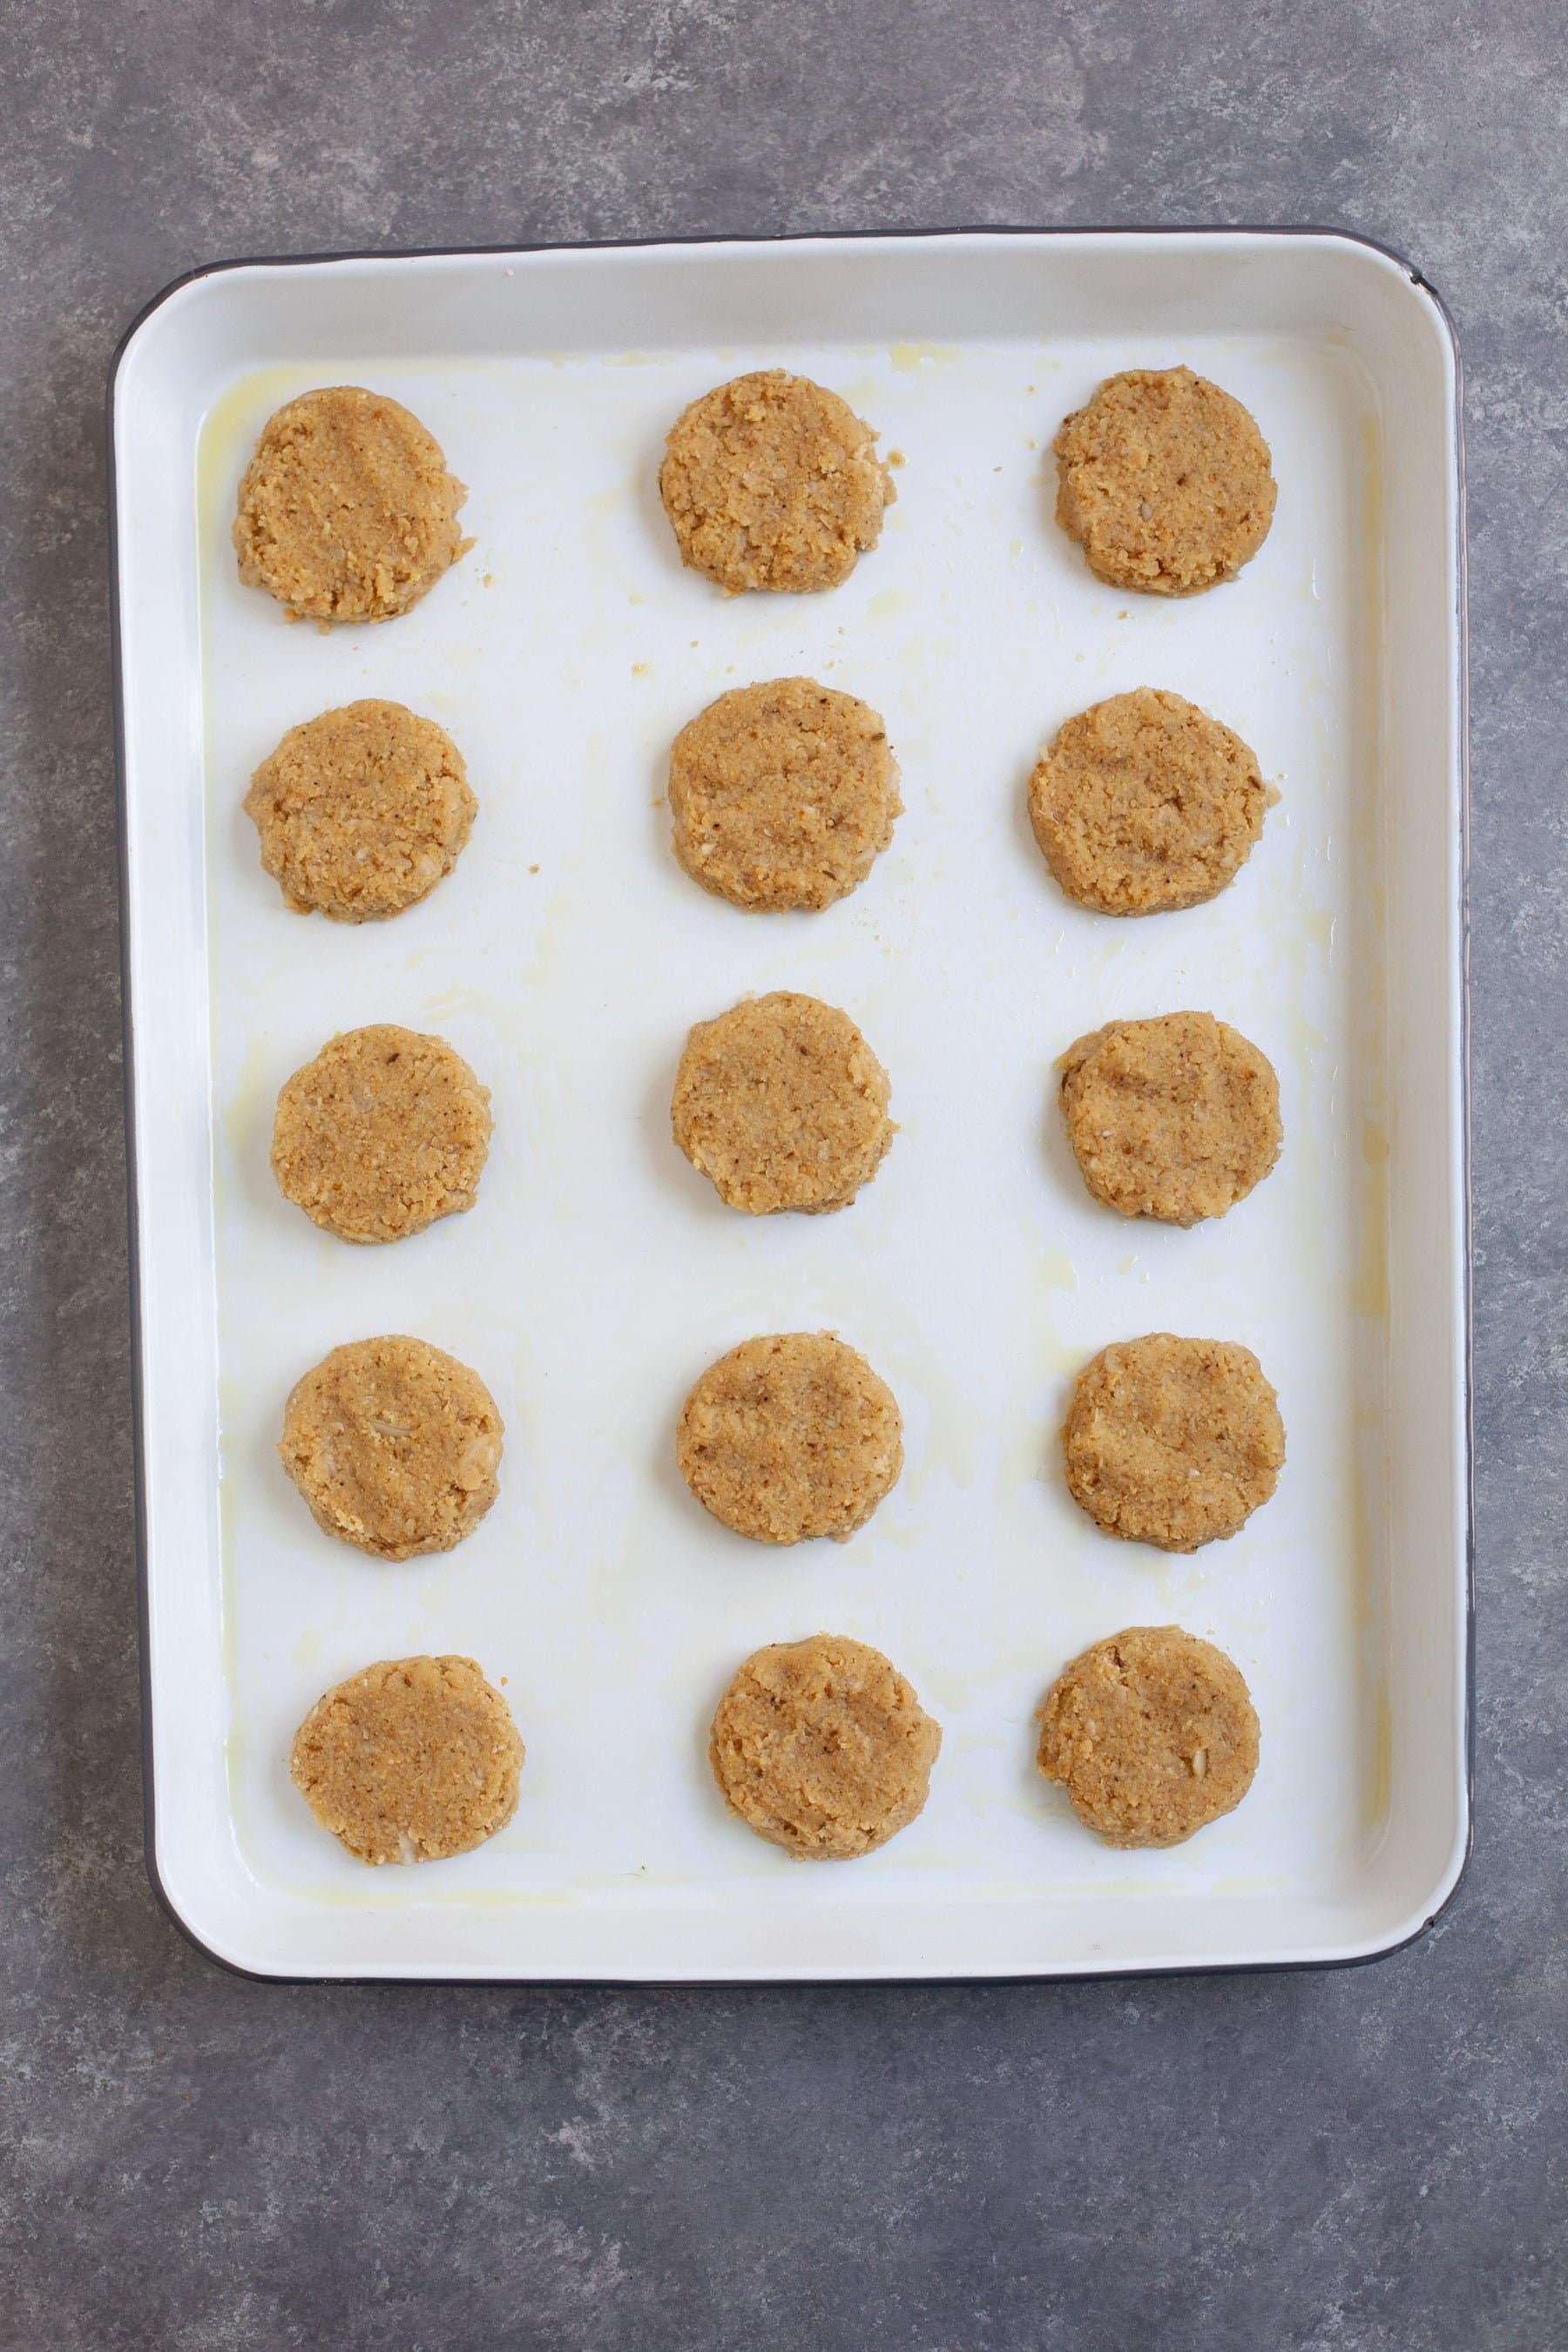 Falafel patties lined up on a baking dish, ready for cooking